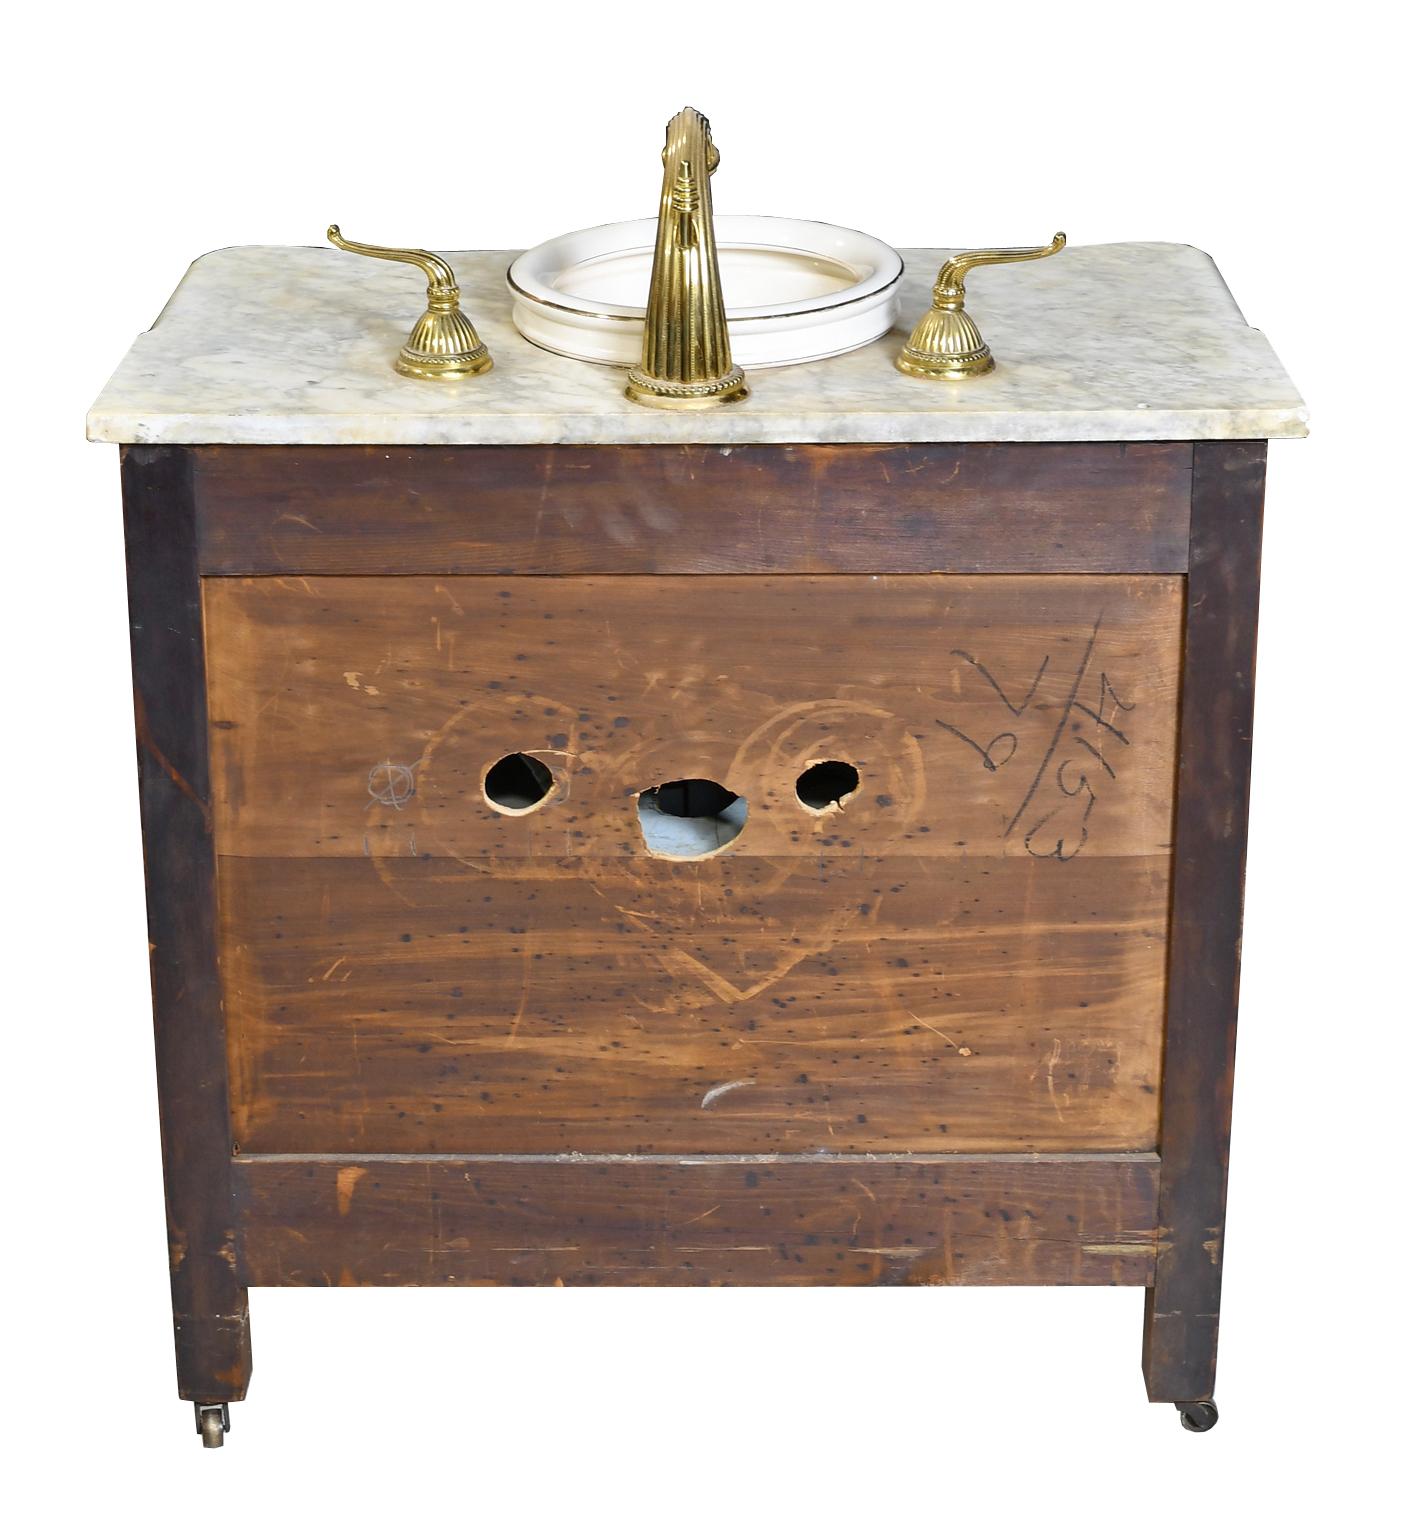 Hand-Carved Antique Victorian Walnut Cabinet w/ White Marble Top Adapted with Sink & Faucet